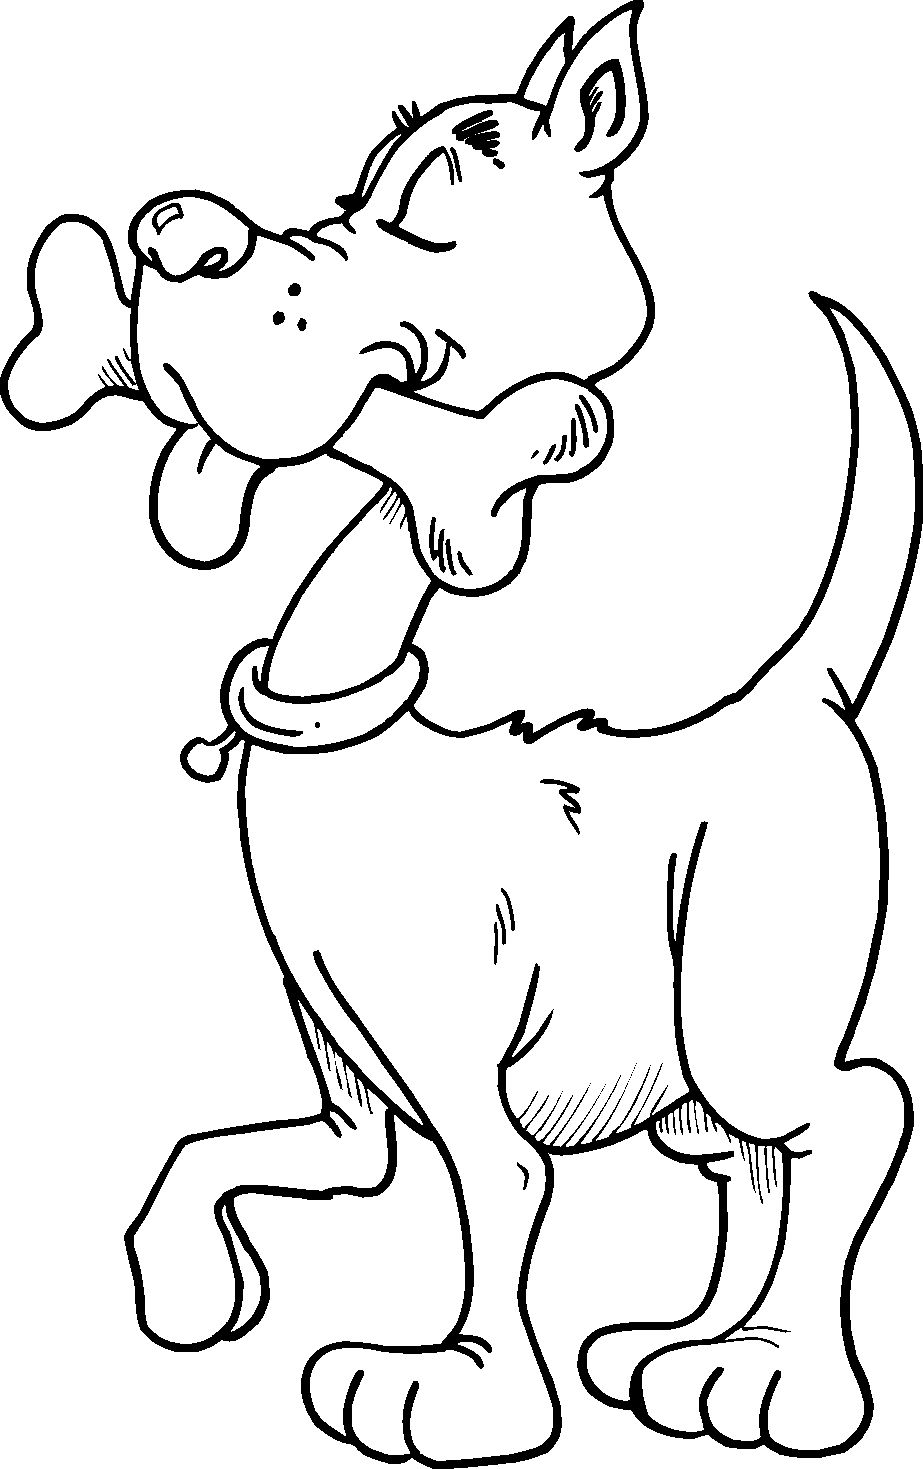 Cartoon Drawings Of Animals - Clipart library